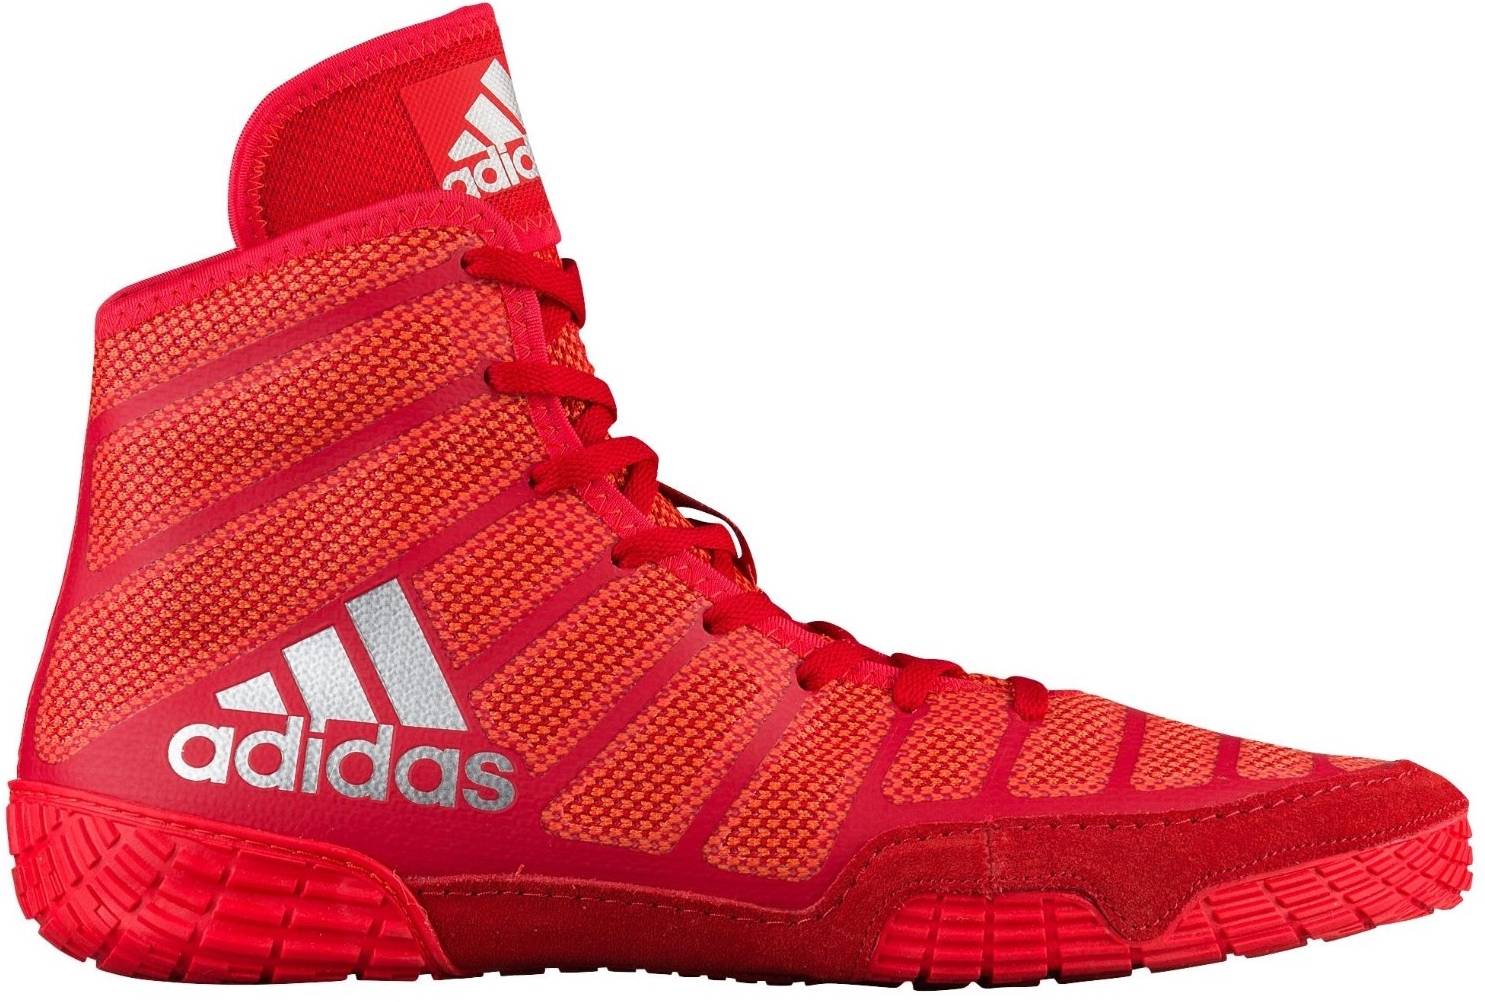 Save 37% on Red Adidas Wrestling Shoes 